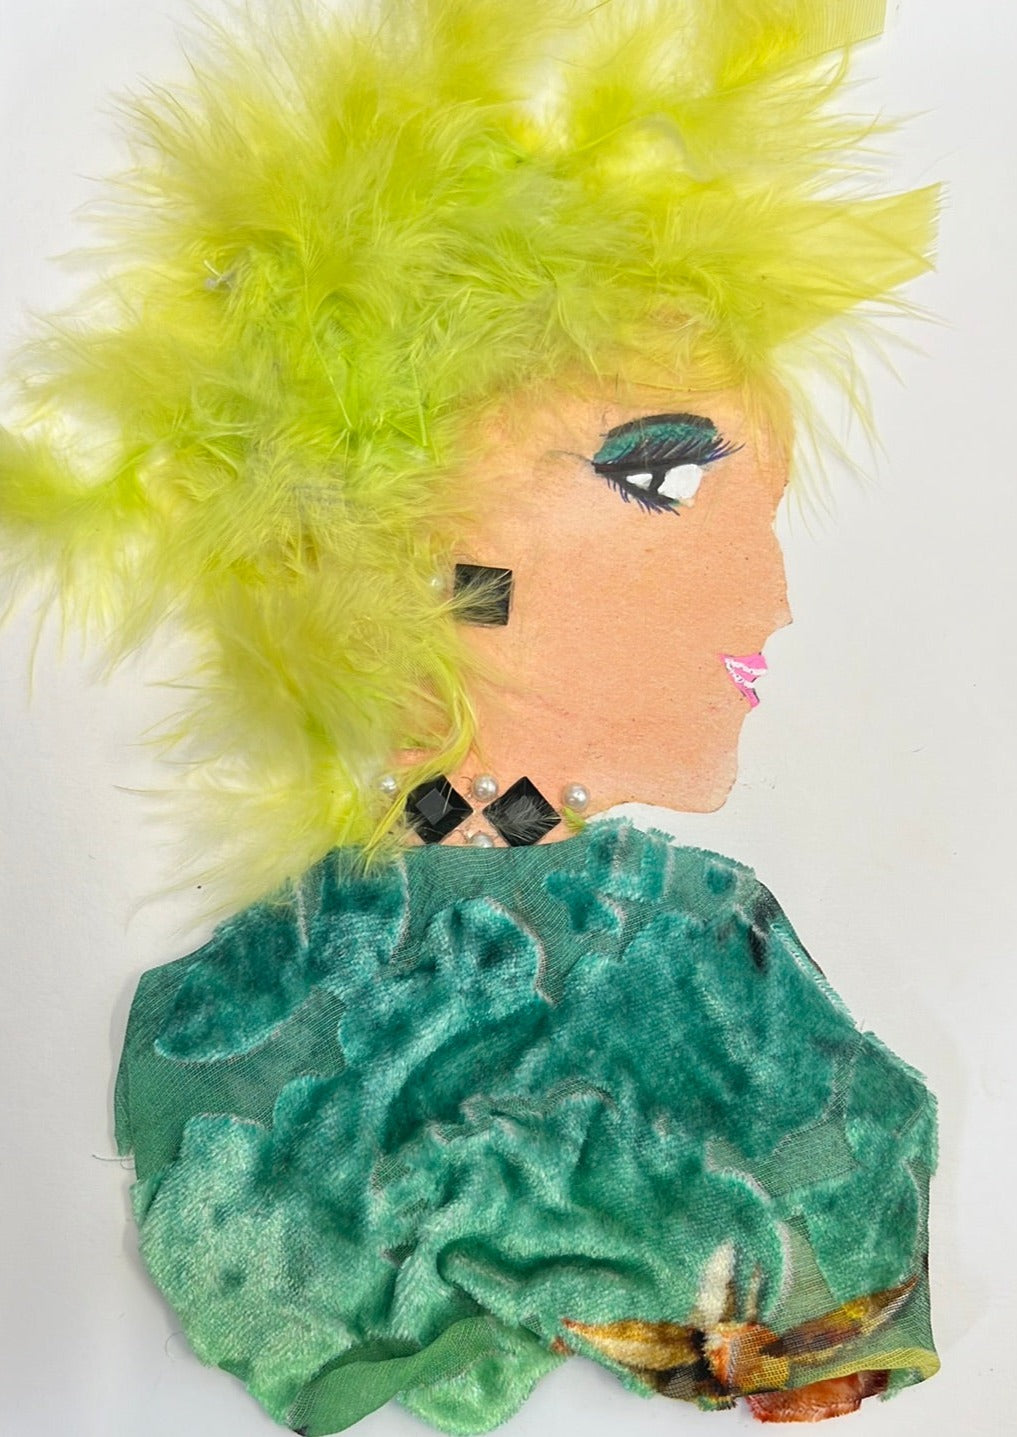 This card is of a woman given the name Sunflower Daisy. Sunflower wears a green velvet material top with a necklace made up of black diamonds and pearls. Her hair is electric yellow and feathery. 